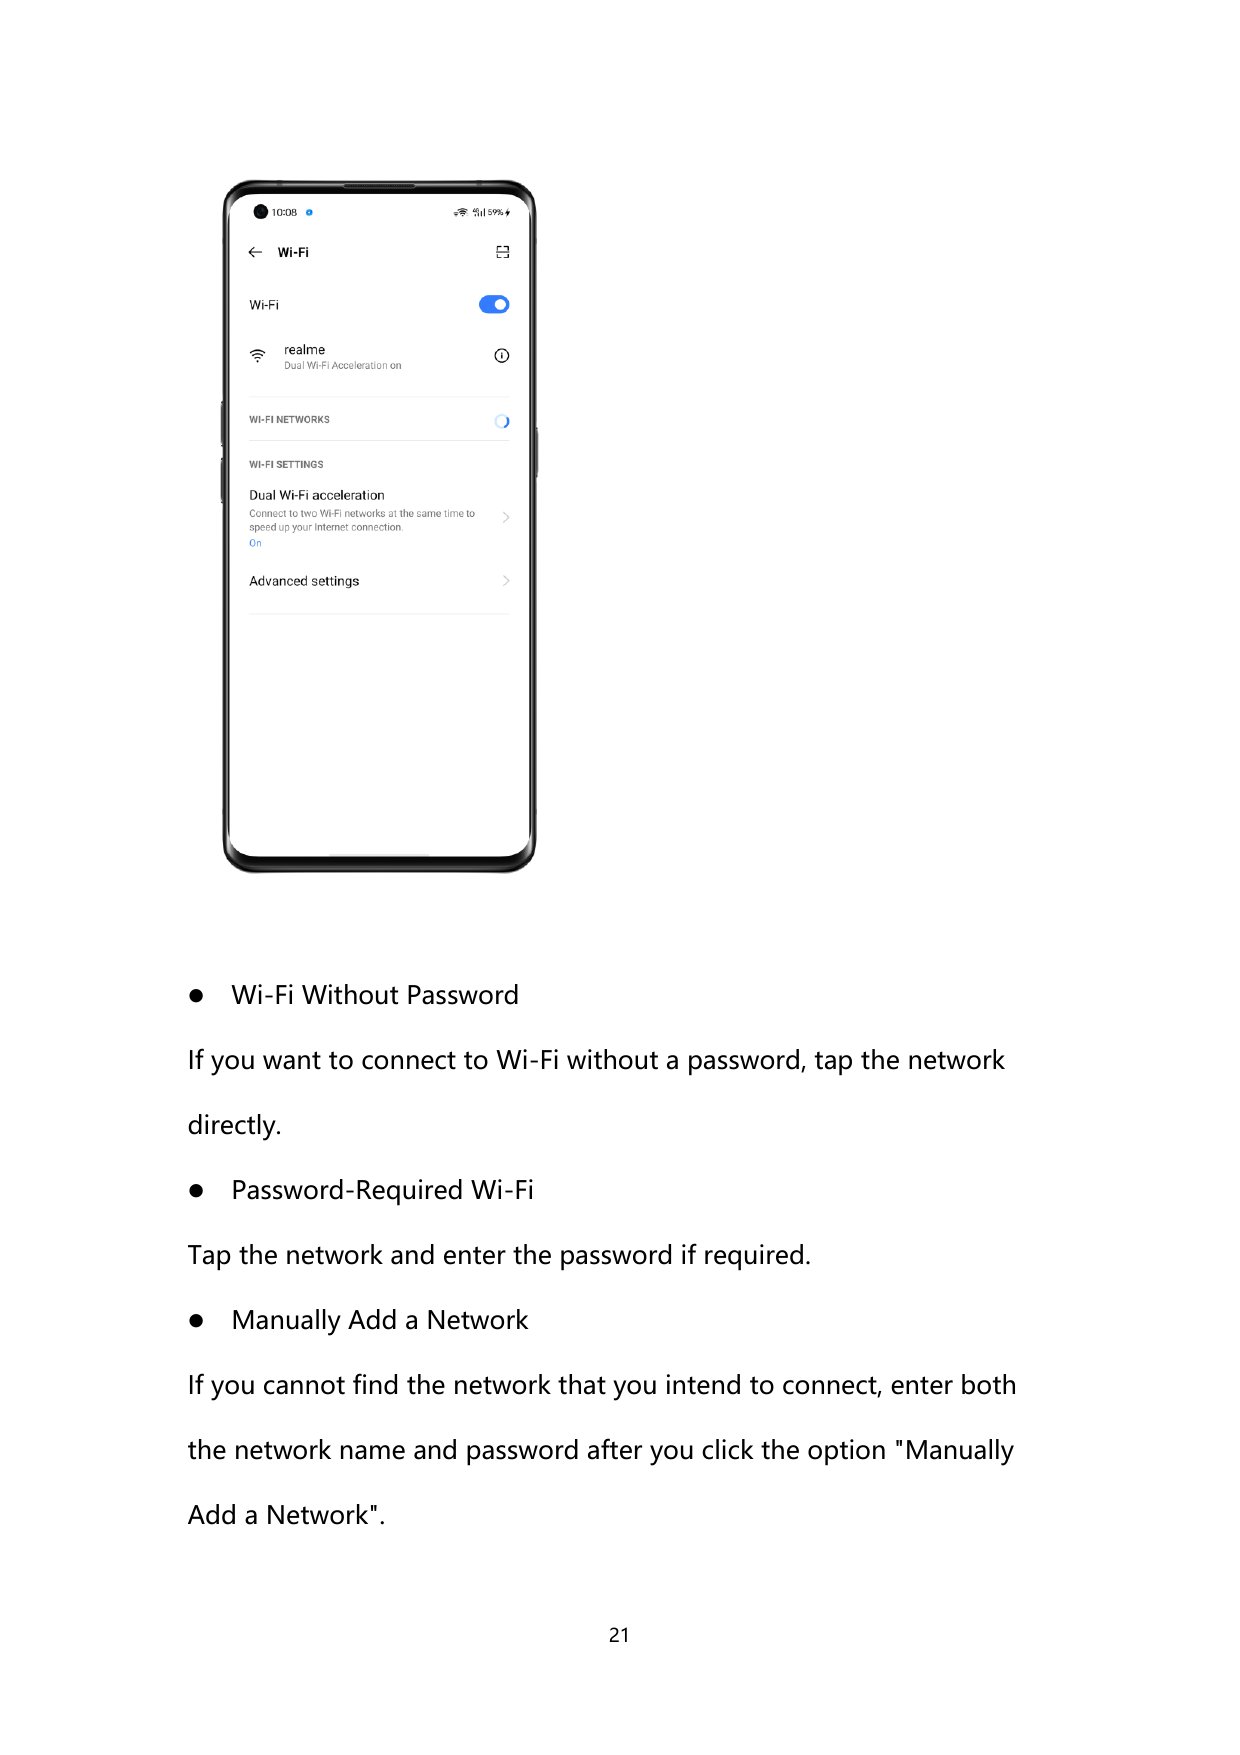 Wi-Fi Without PasswordIf you want to connect to Wi-Fi without a password, tap the networkdirectly.Password-Required Wi-FiTap t